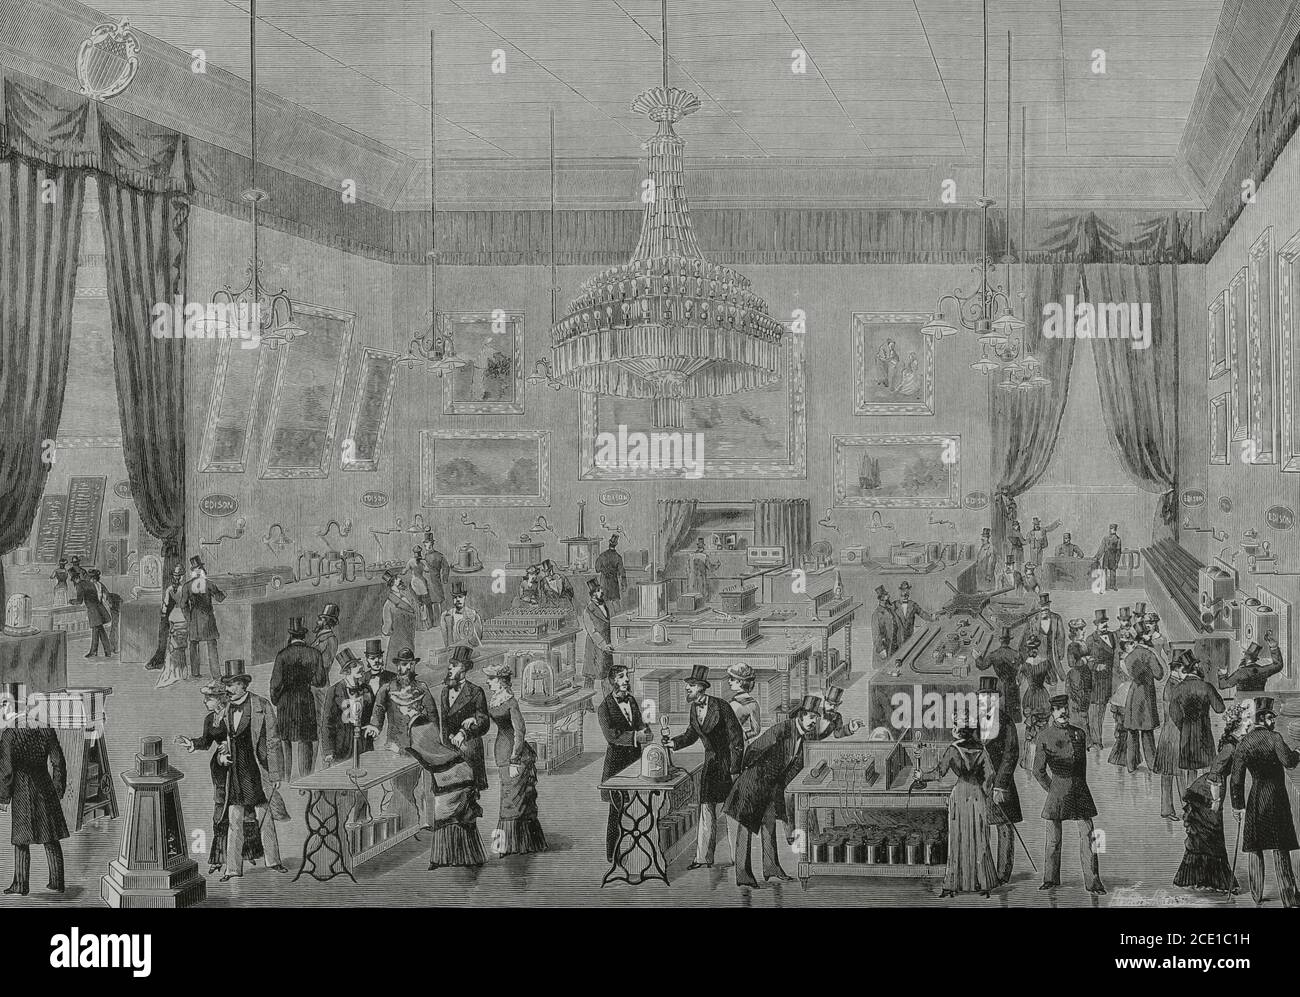 France, Paris. The first International Exhibition of Electricity, 1881. Held from August 15 through to November 15, 1881 at the Palais de l'Industrie on the Champs-Elysées. This congress was important to built the modern International System of Units, since ohm, ampere, coulomb and farad were defined on that occasion. Thomas Edison (1847-1931) special installation. Engraving. La Ilustracion Española y Americana, 1881. Stock Photo